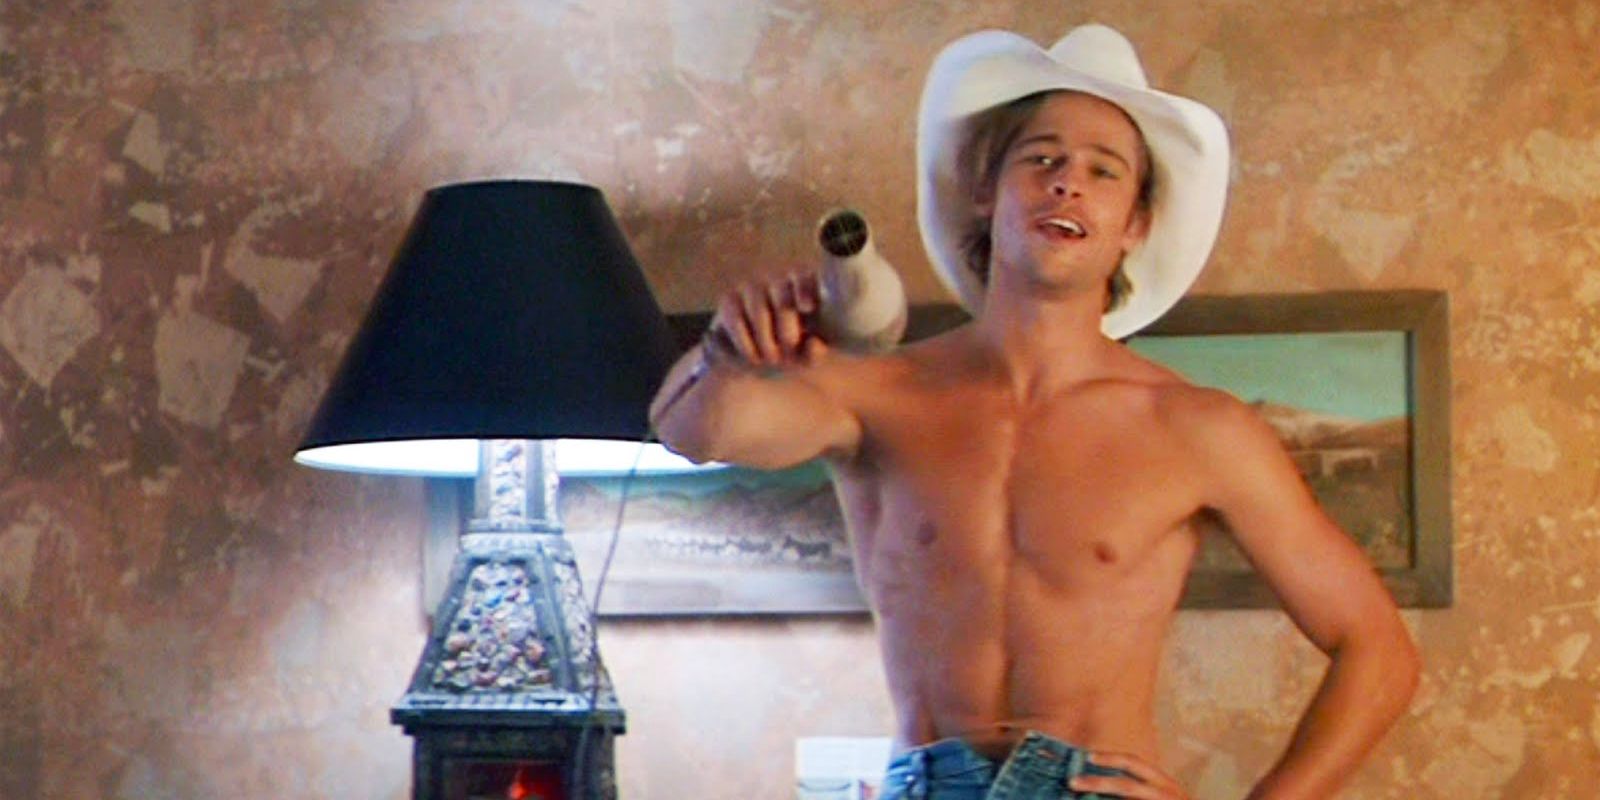 Brad Pitt stands in a hotel wearing a cowboy hat and wielding a hair dryer like a handgun in Thelma & Louise